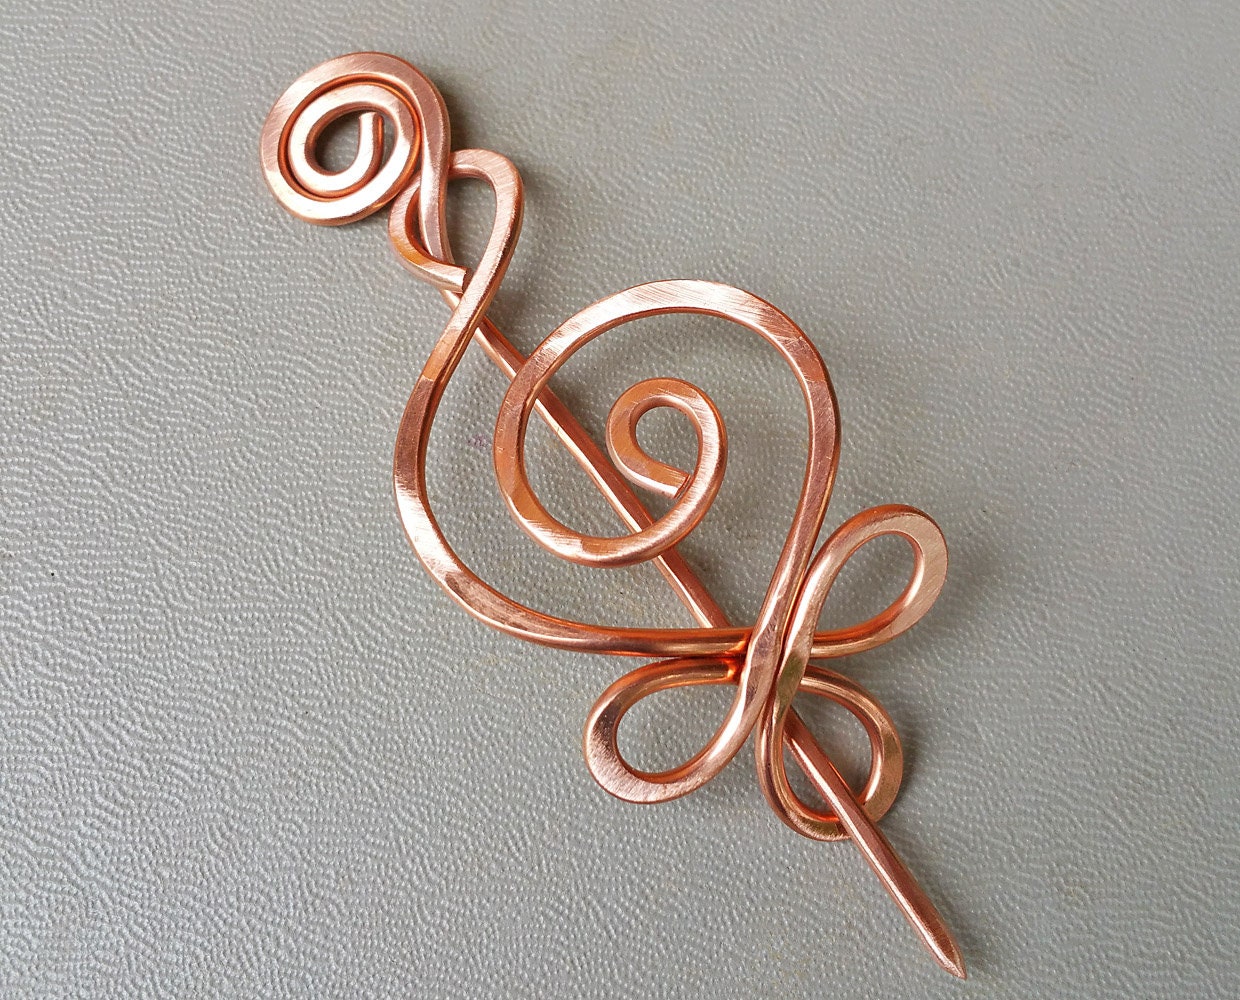 Handmade spiral copper cardigan clasp or sweater clasp for knit and fabric  - Sweater clip - Metal clasp - CL005